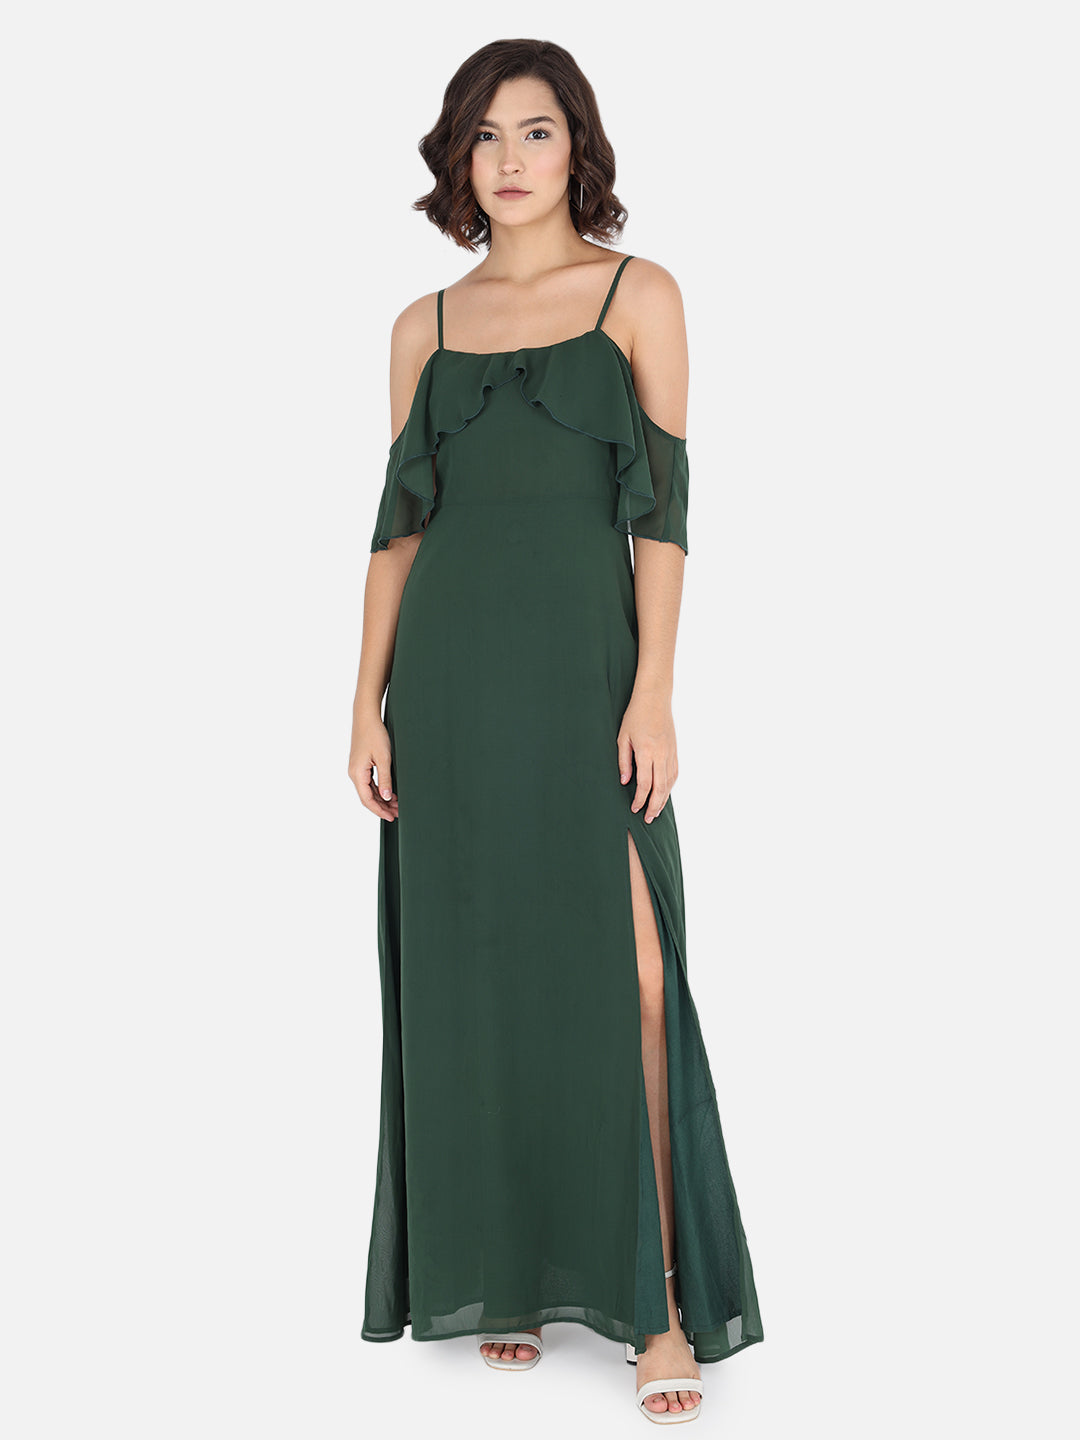 Trend Arrest Women's  Polyester Solid Stylish Maxi Dress